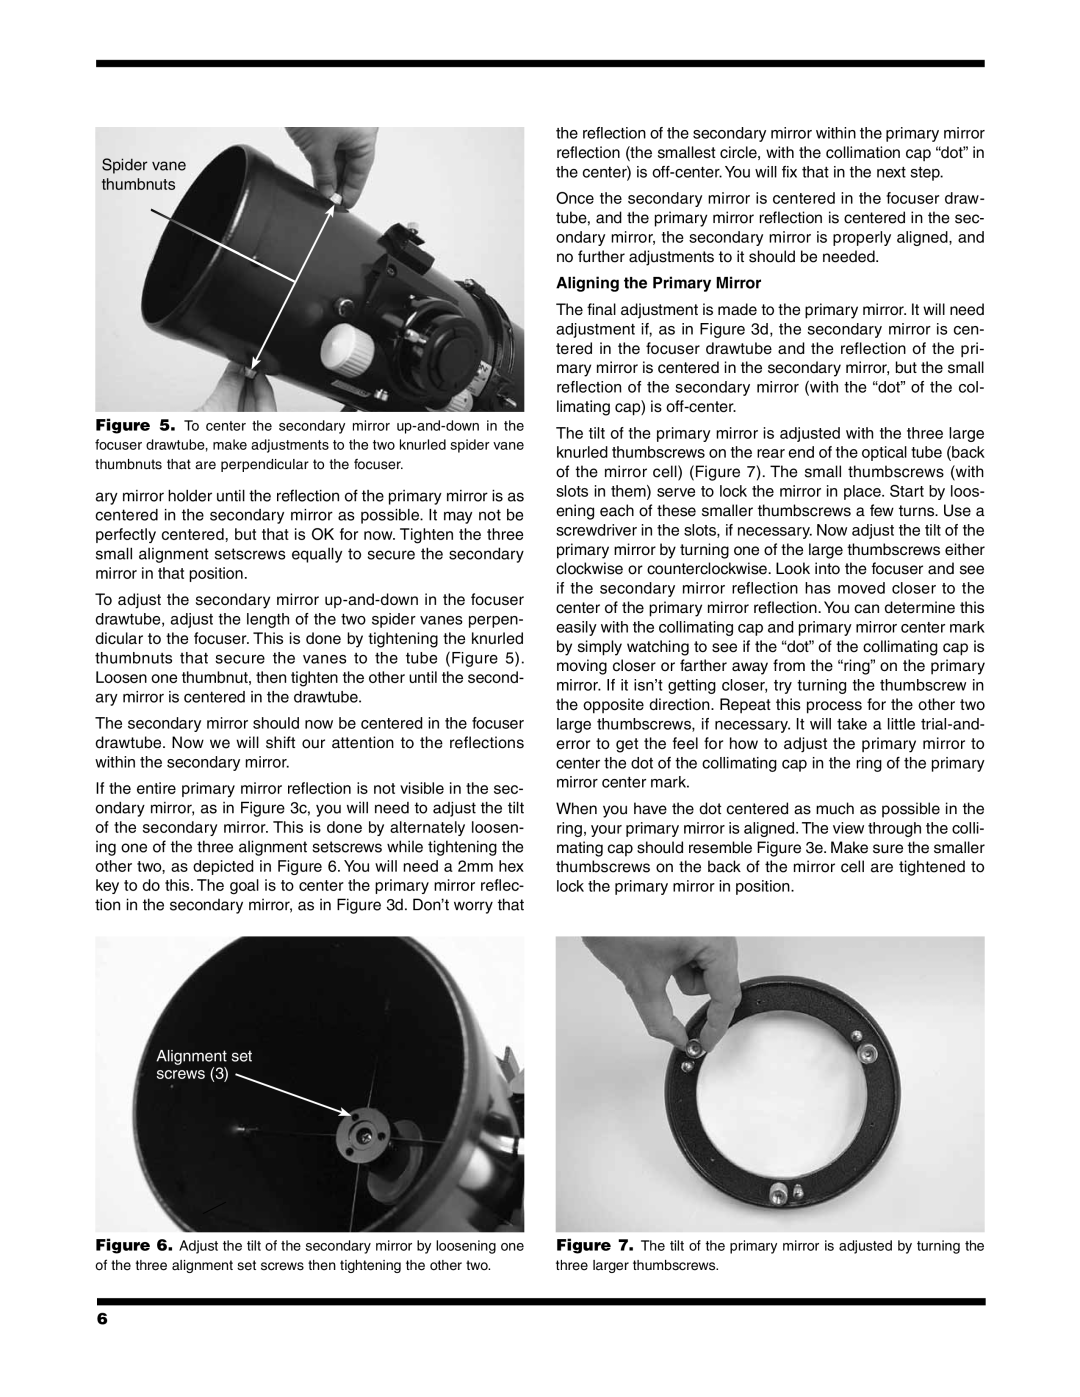 Orion 9786 instruction manual Aligning the Primary Mirror, Alignment set screws 